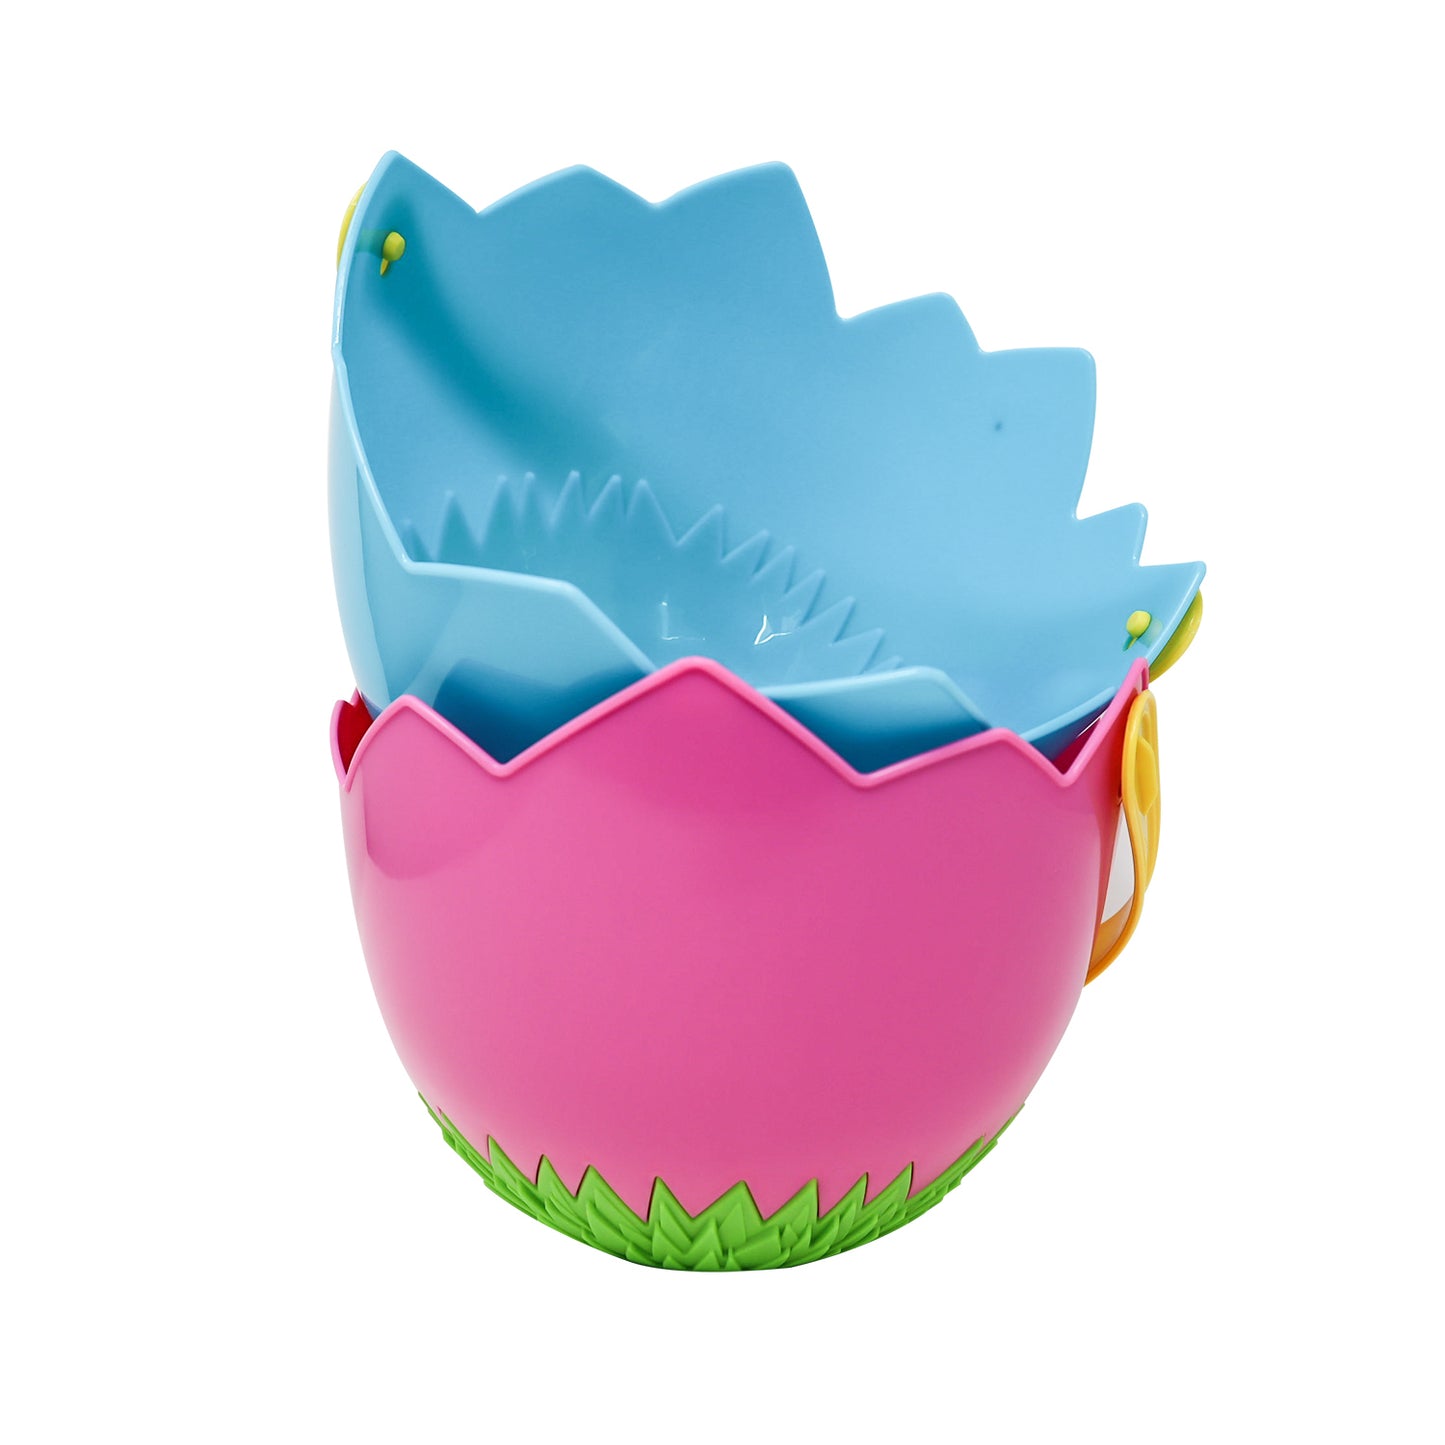 Cool Gear 2-Pack Plastic Easter Basket with Handle | Easter Egg Shaped Bucket for Kids and Adult Spring Easter Egg Hunting Party | Pink and Blue Reusable Basket Decoration